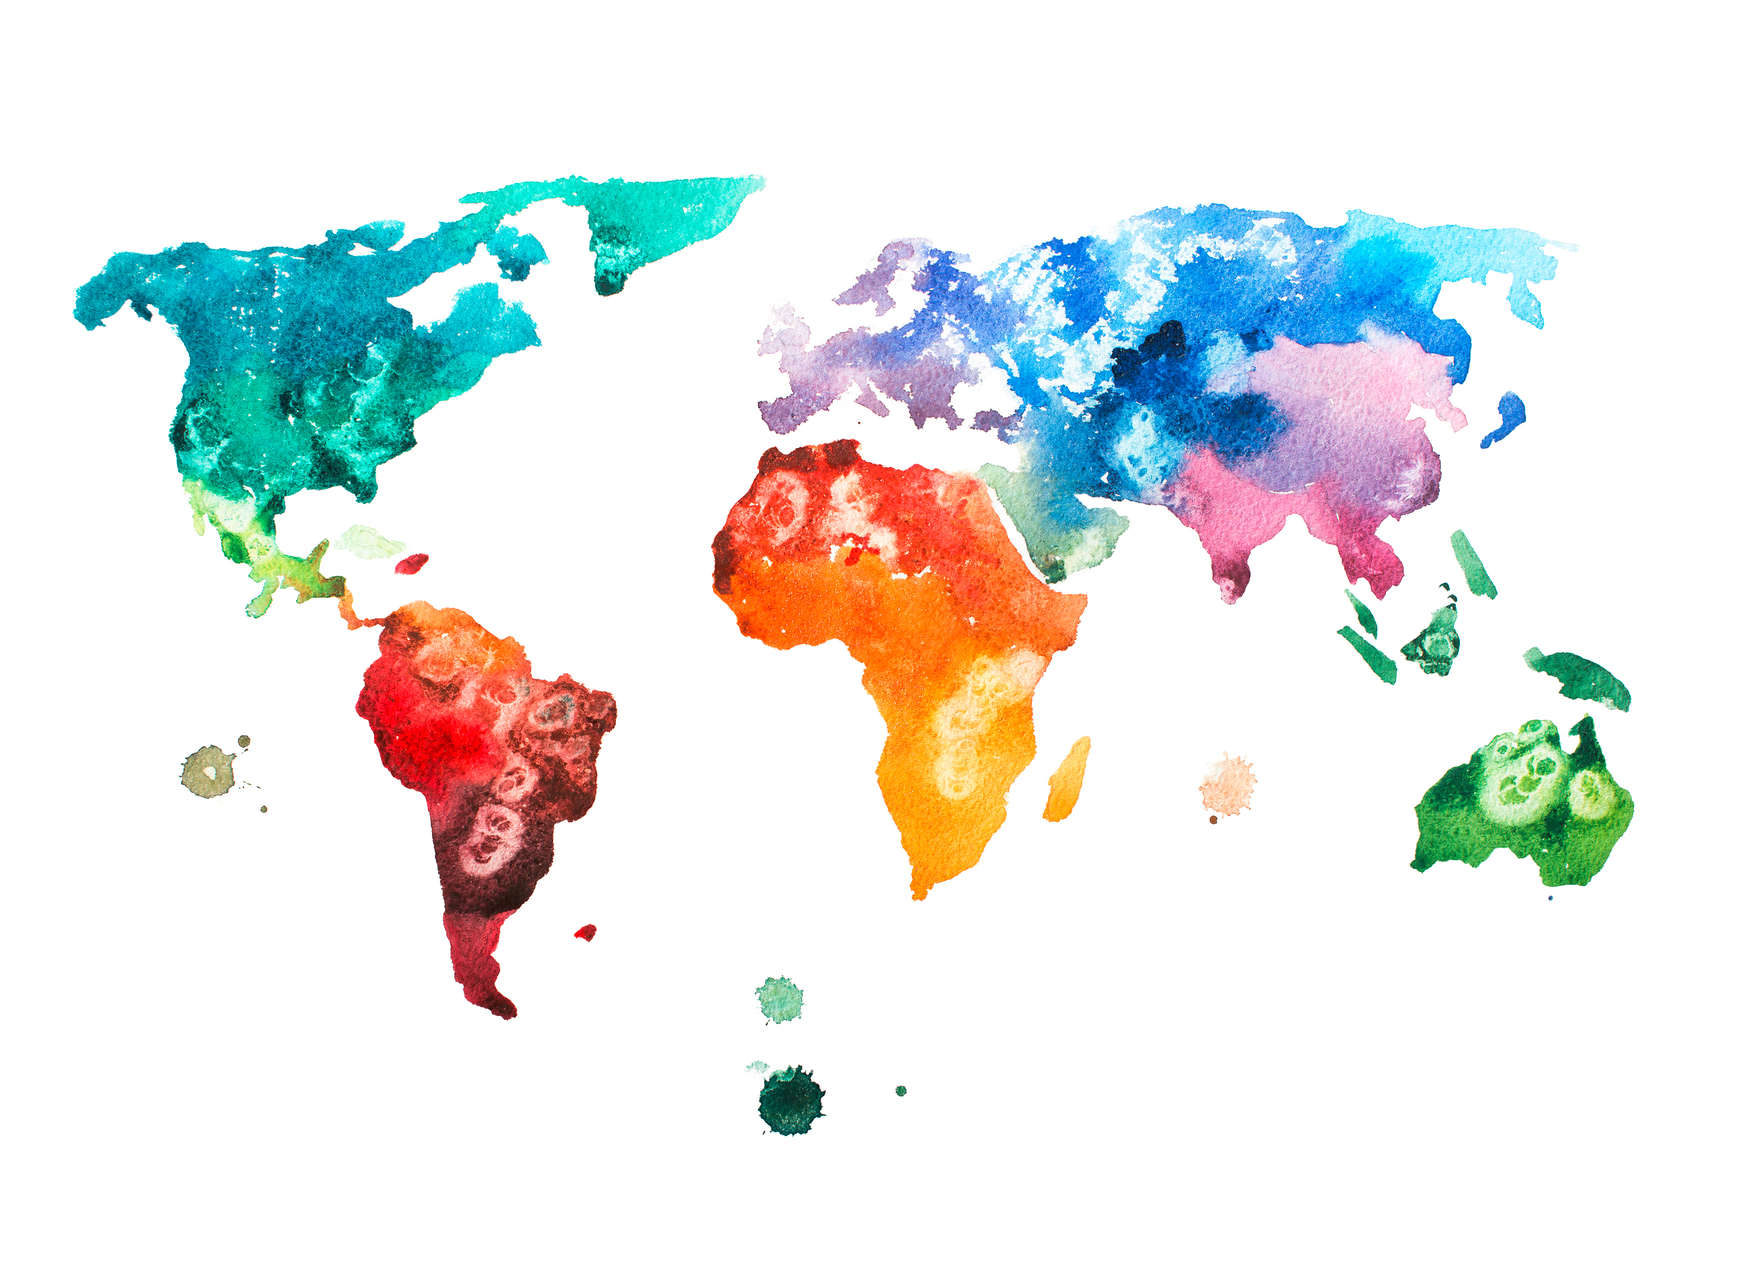             World map mural in watercolour look - colourful, white
        